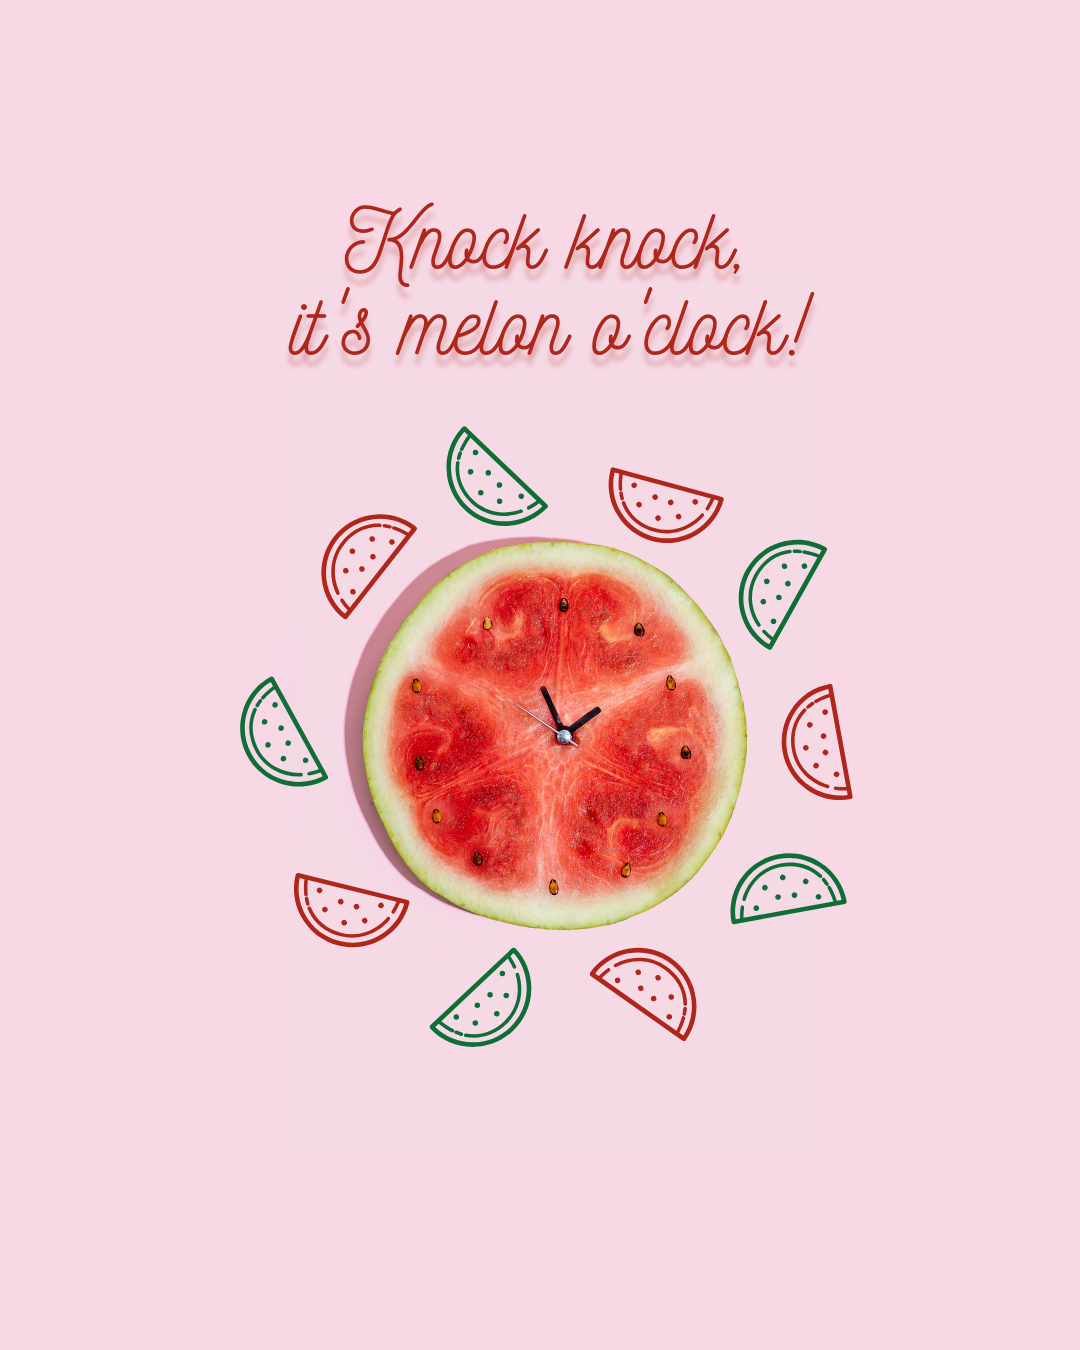 a watermelon clock with a clock face